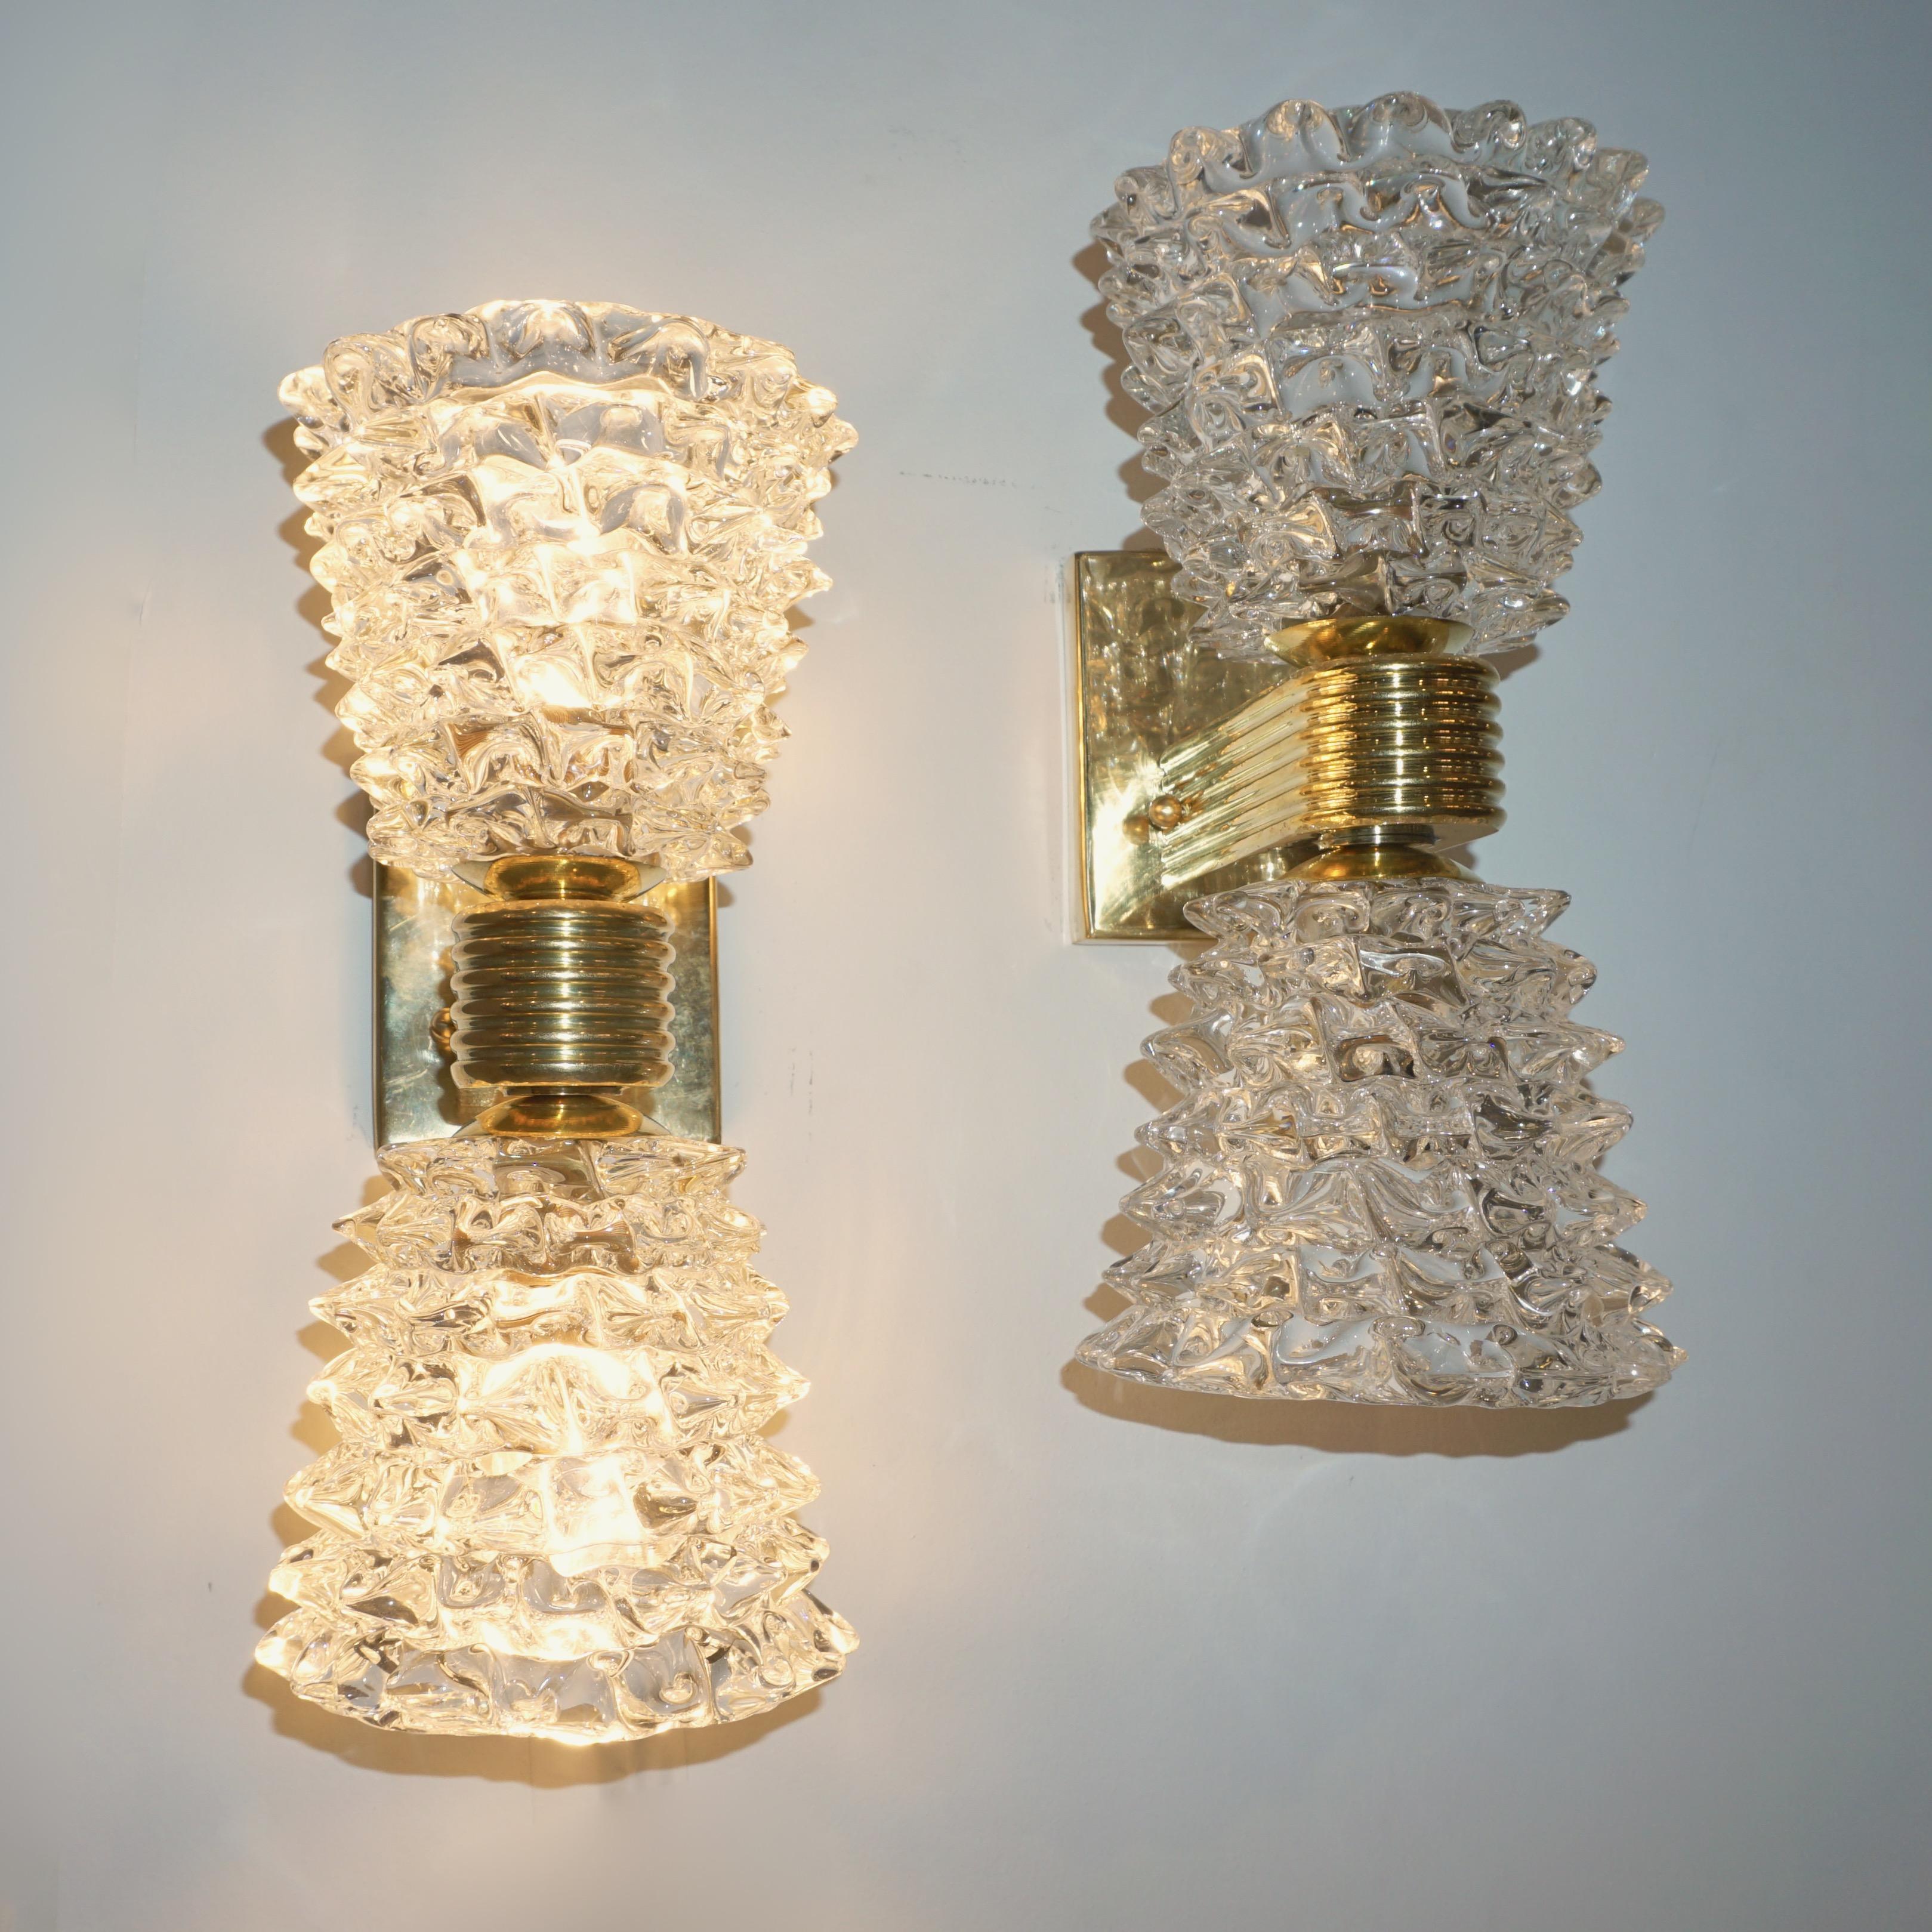 Organic sculpture pair of modern crystal clear Murano glass wall lights in the Art Deco style of Barovier Toso, entirely handcrafted in Italy, with double cone shape shades providing upward and downward light source, made using the rostrato